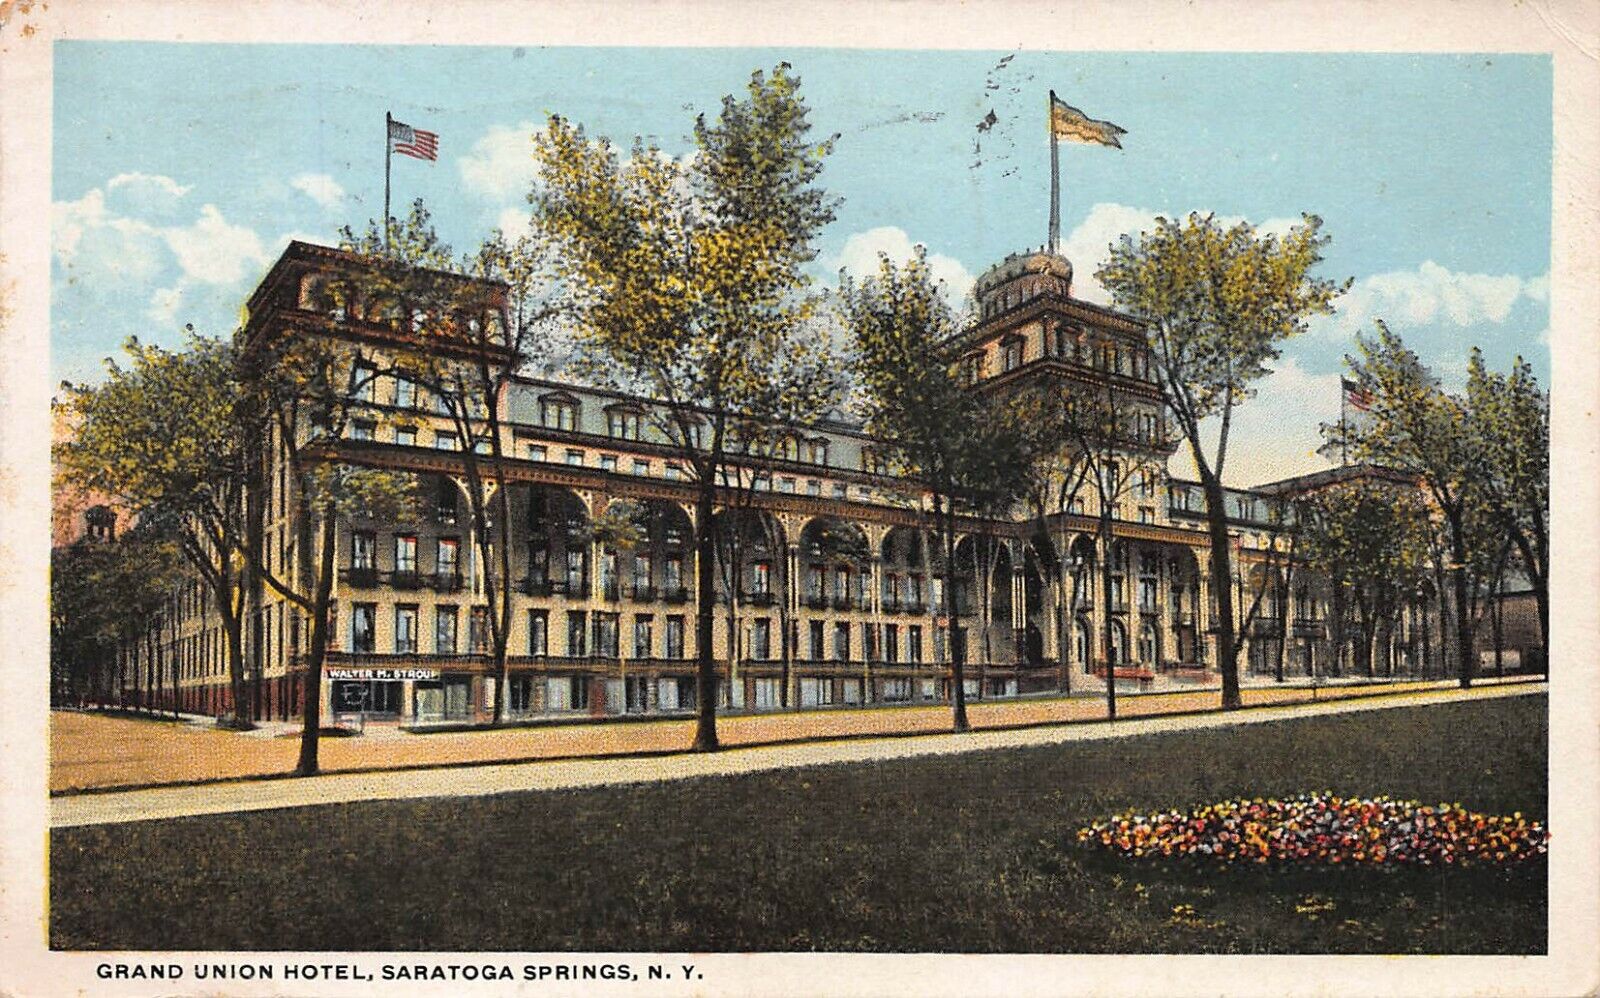 Grand Union Hotel, Saratoga Springs, N.Y., Early Postcard, Used in 1920